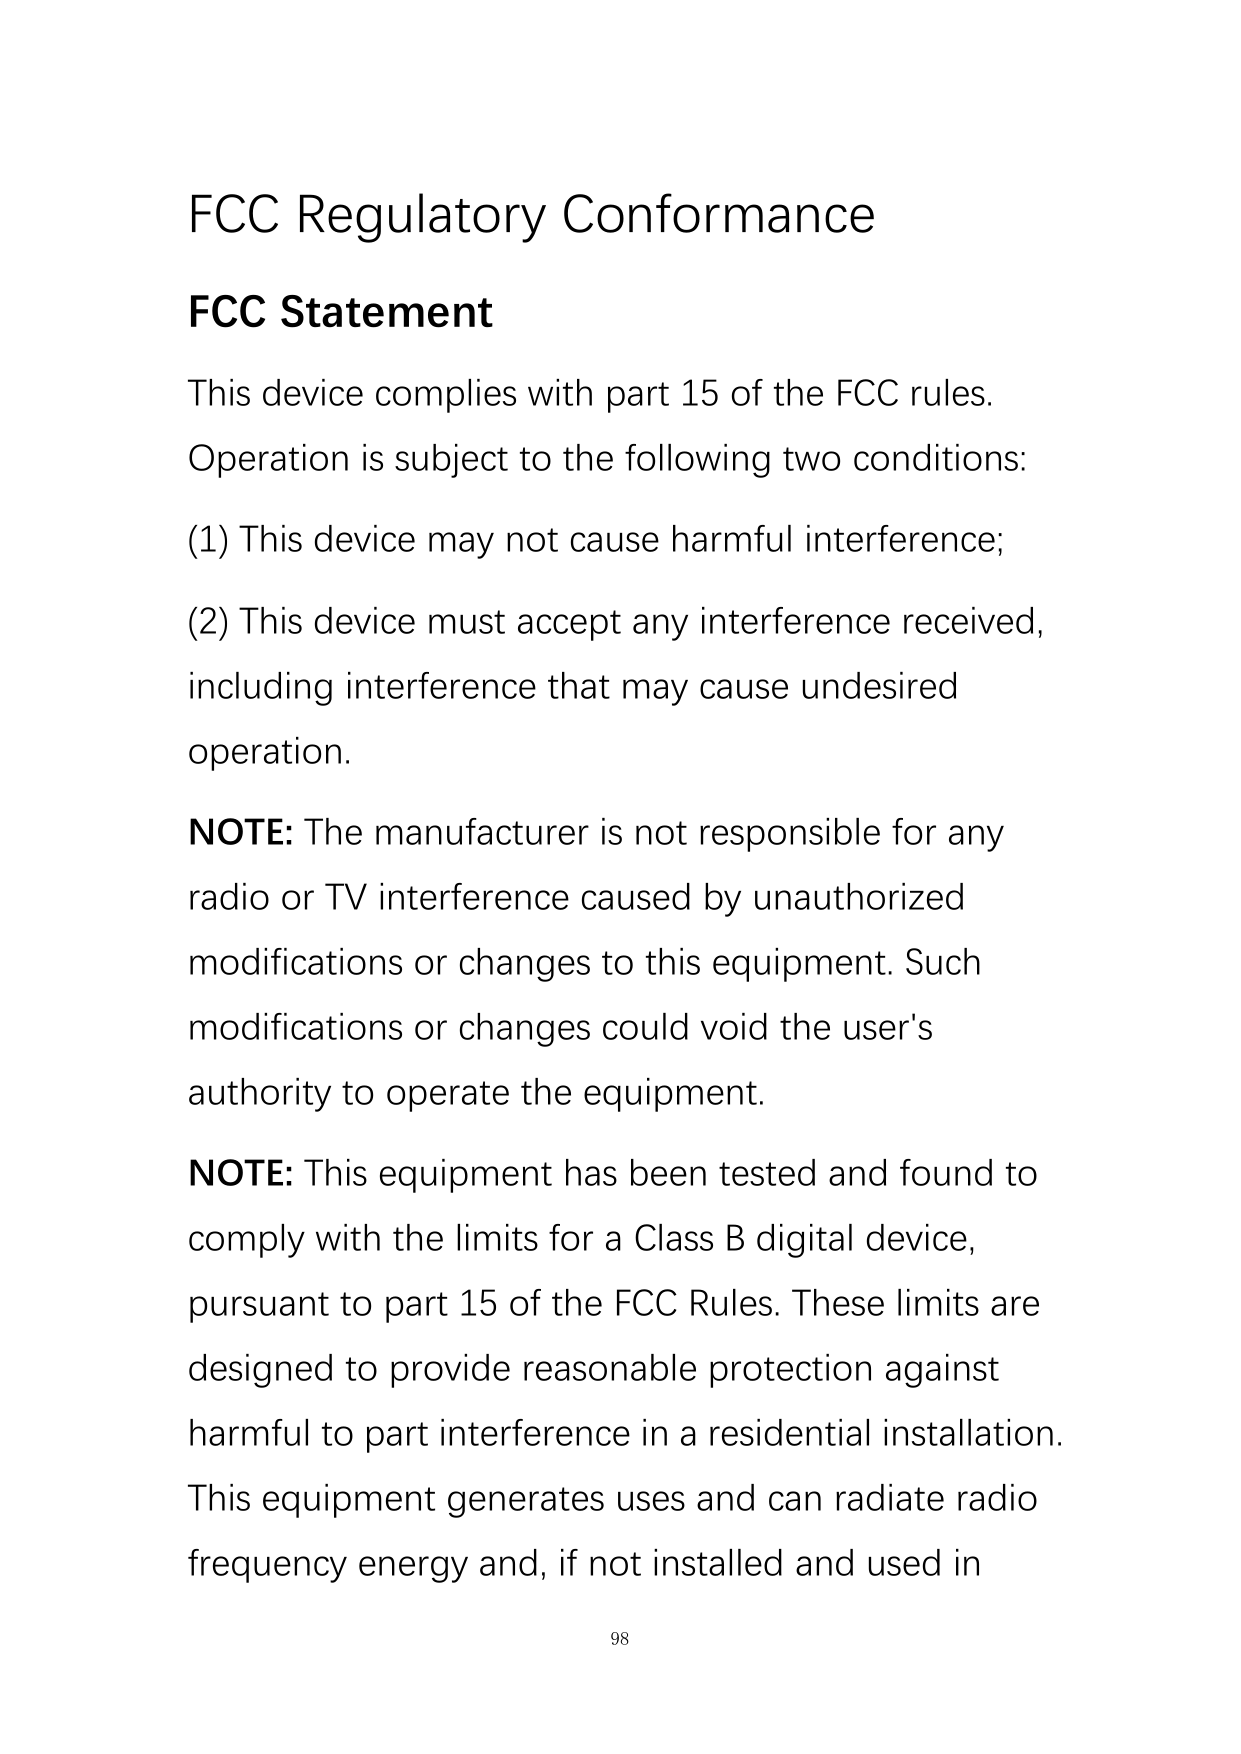 FCC Regulatory ConformanceFCC StatementThis device complies with part 15 of the FCC rules.Operation is subject to the following 